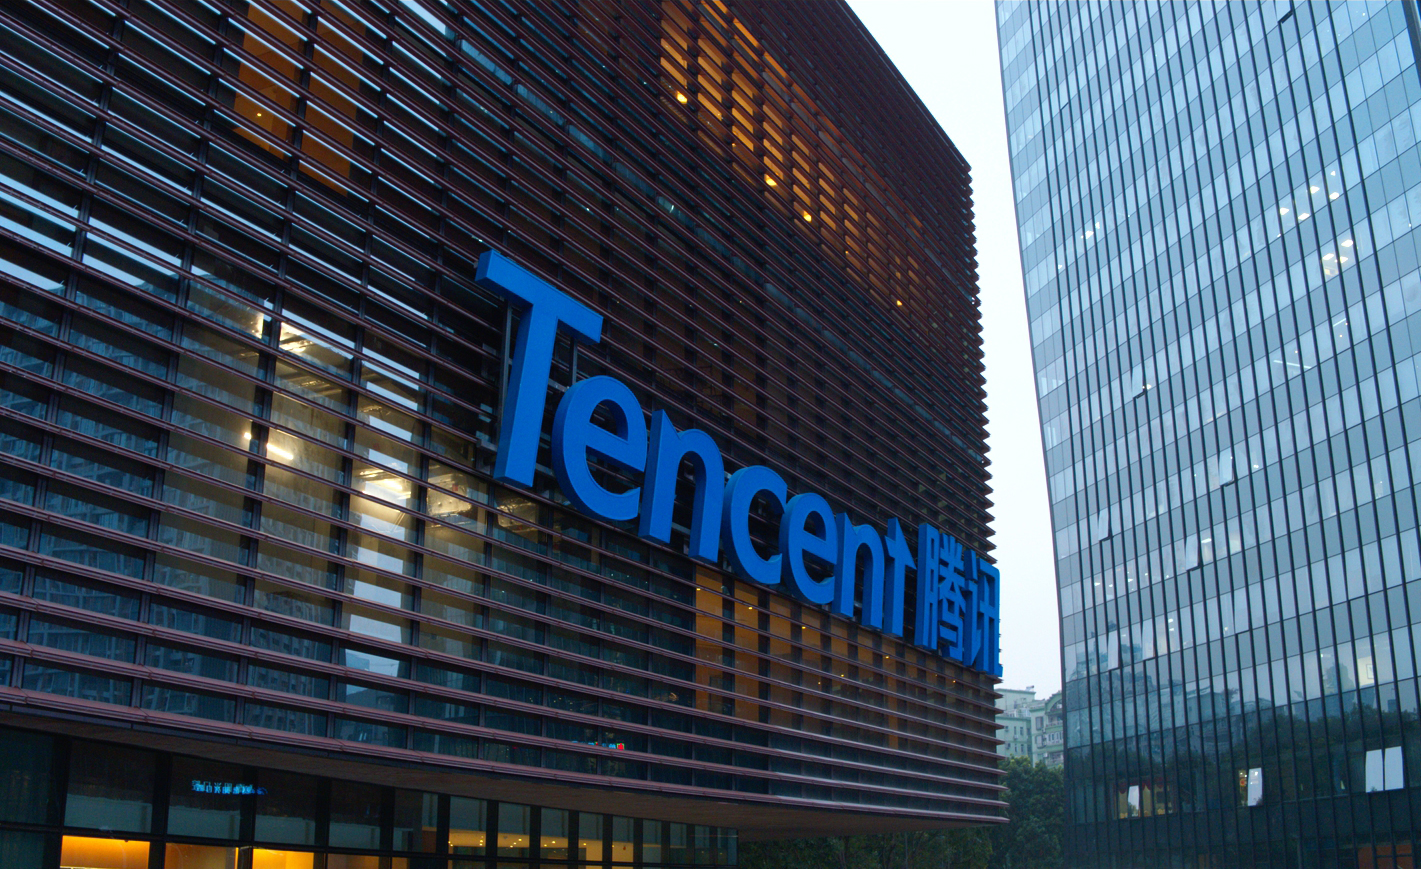 Tencent suspends new user registration for WeChat as tech crackdown shows no signs of halting